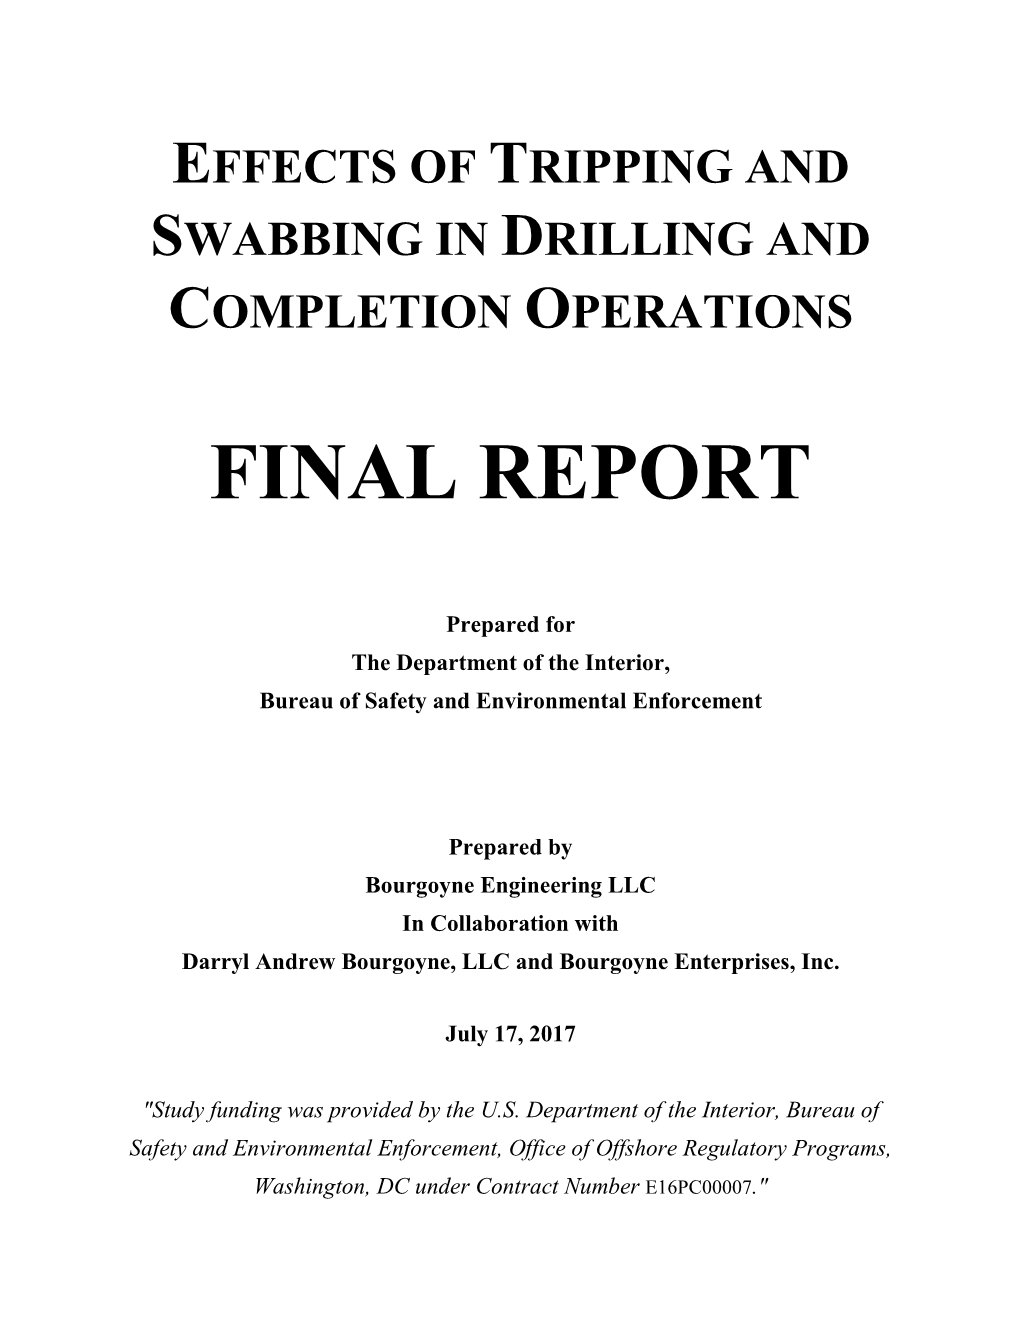 Effects of Tripping and Swabbing in Drilling and Completion Operations